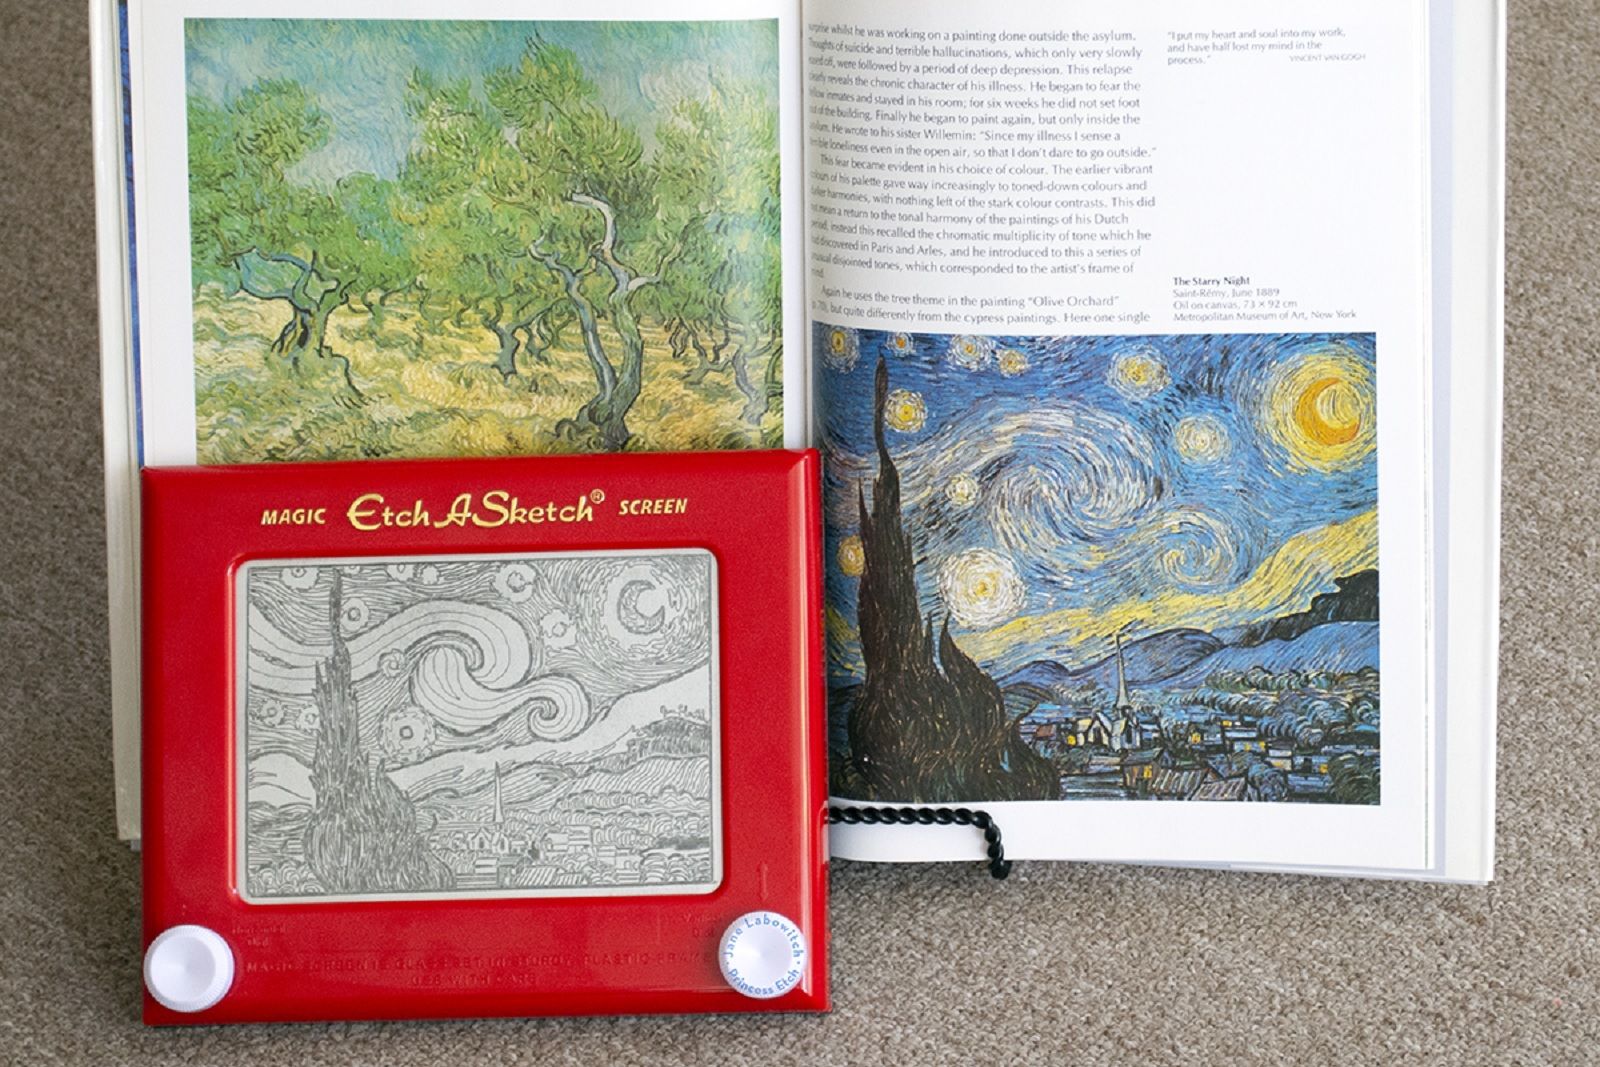 Etch A Sketch sold to Canadian firm after nearly 50 years of US production  | Toys | The Guardian